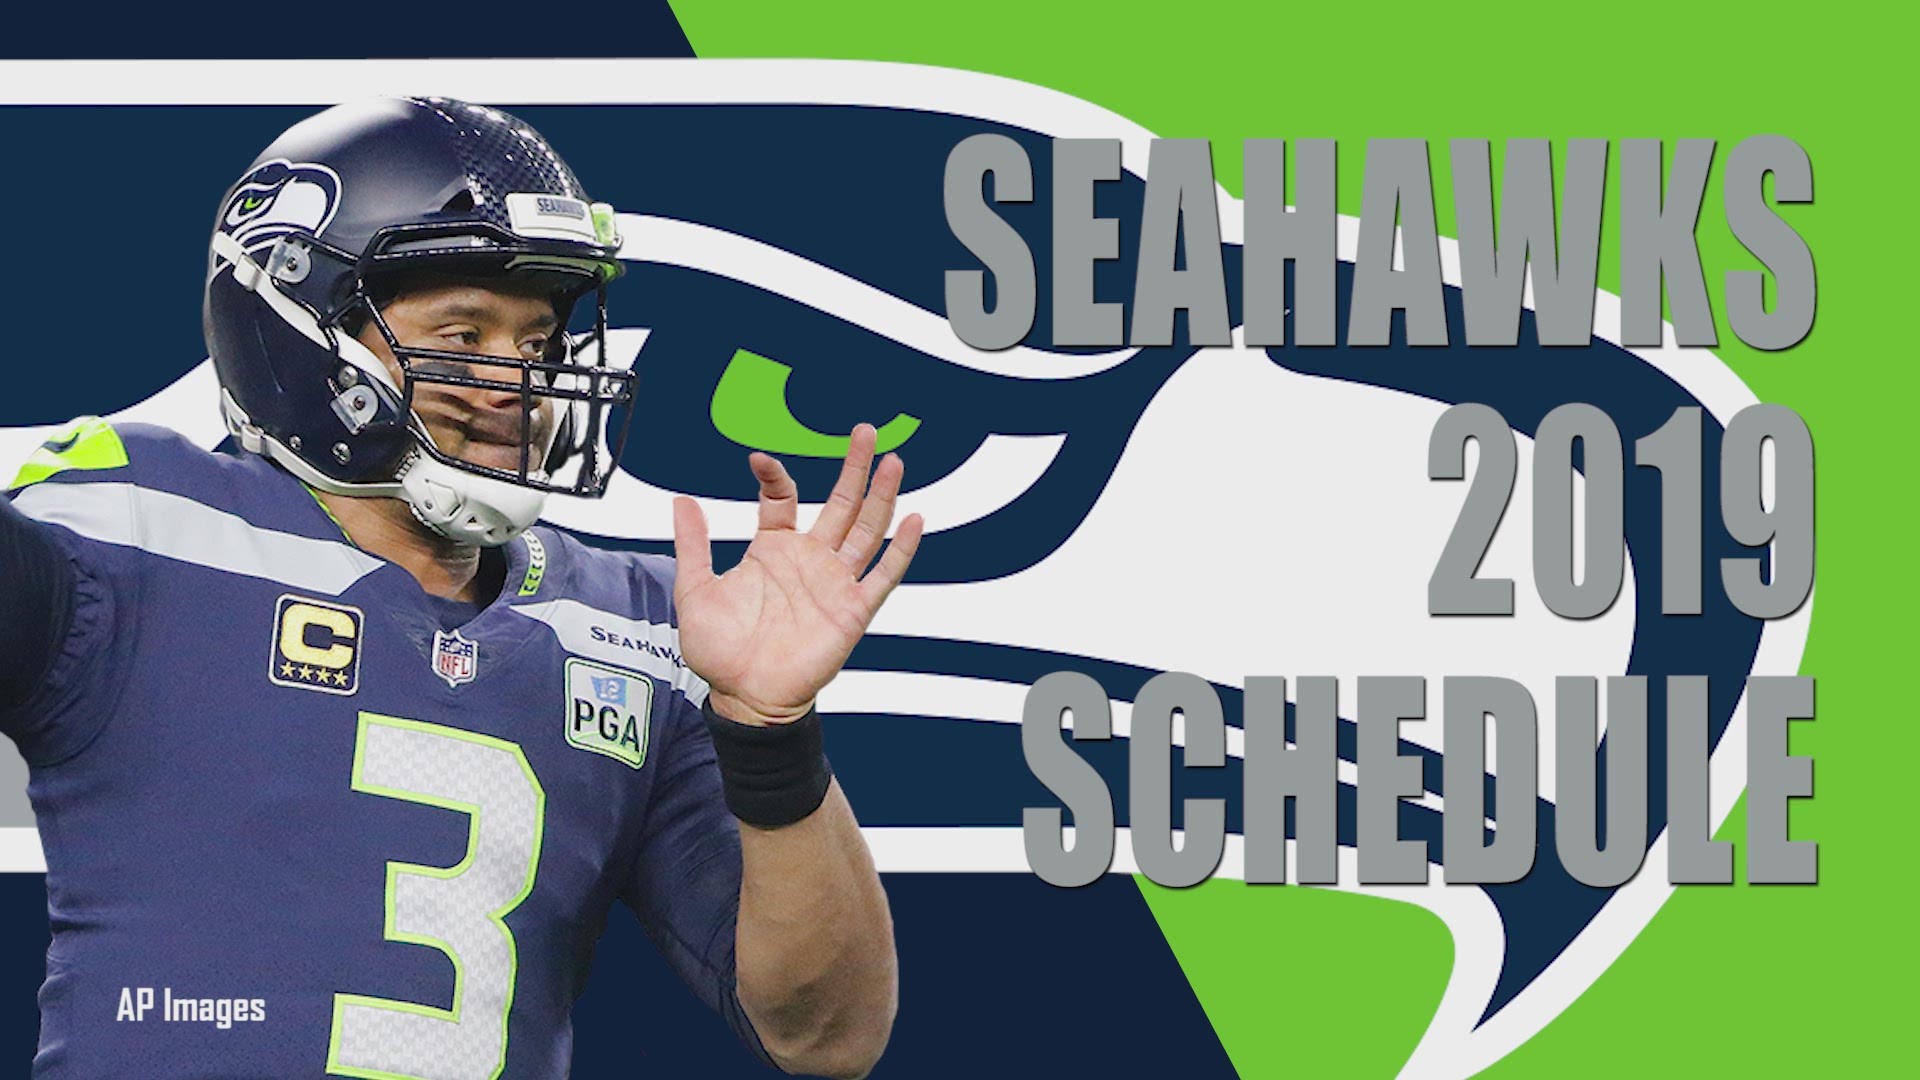 A preview of the 2019 season schedule for the Seahawks.